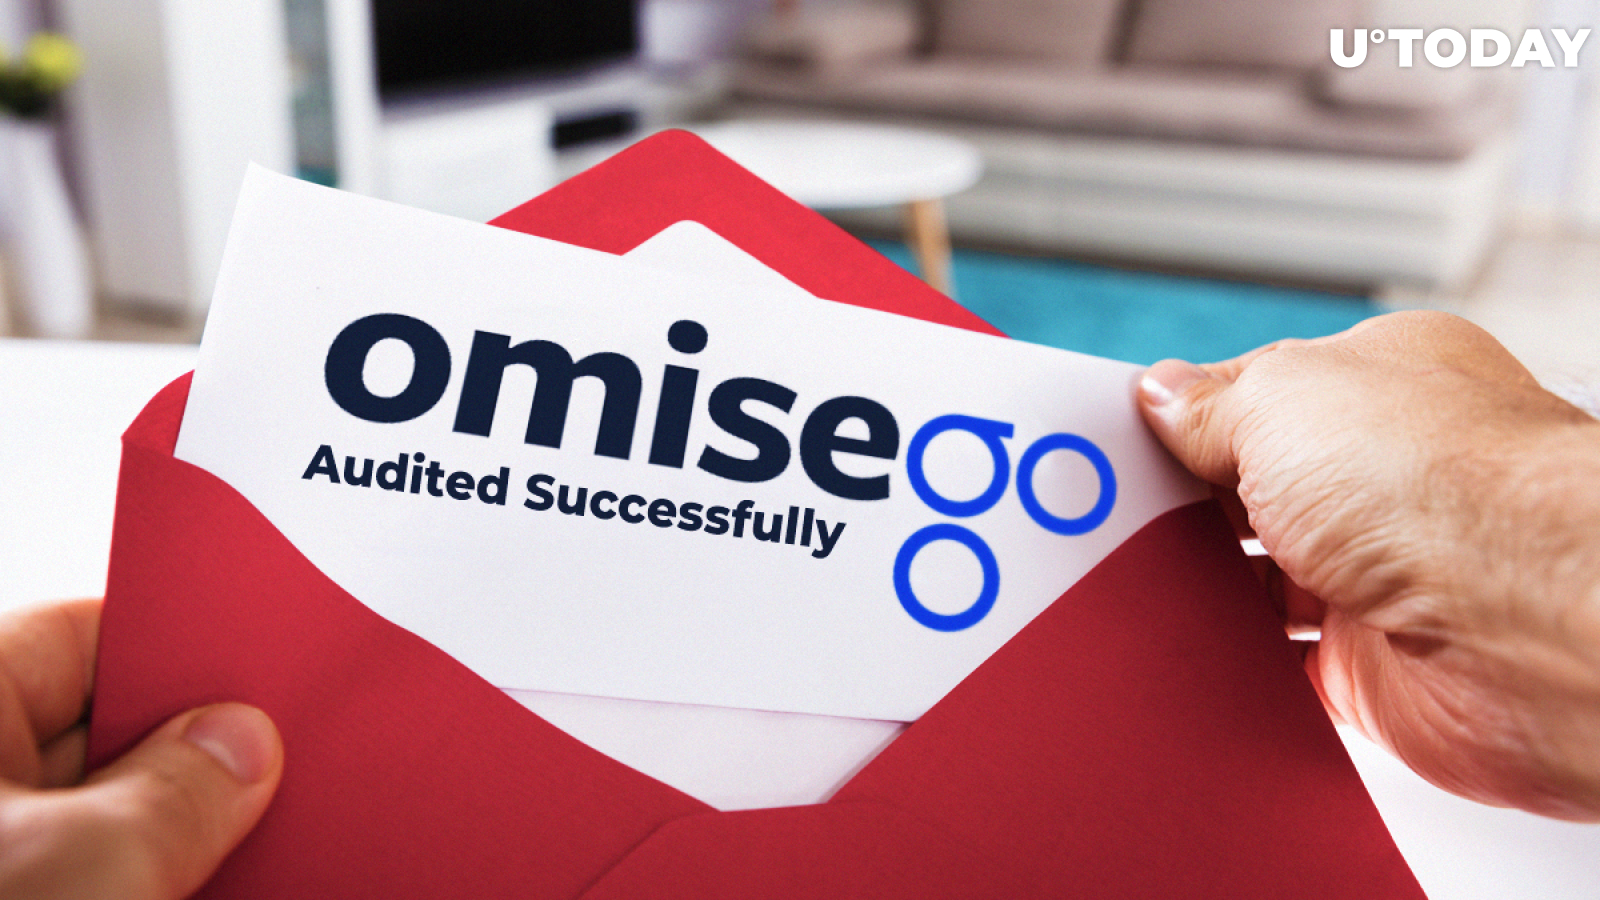 OmiseGo (OMG) Network Audited Successfully: Details